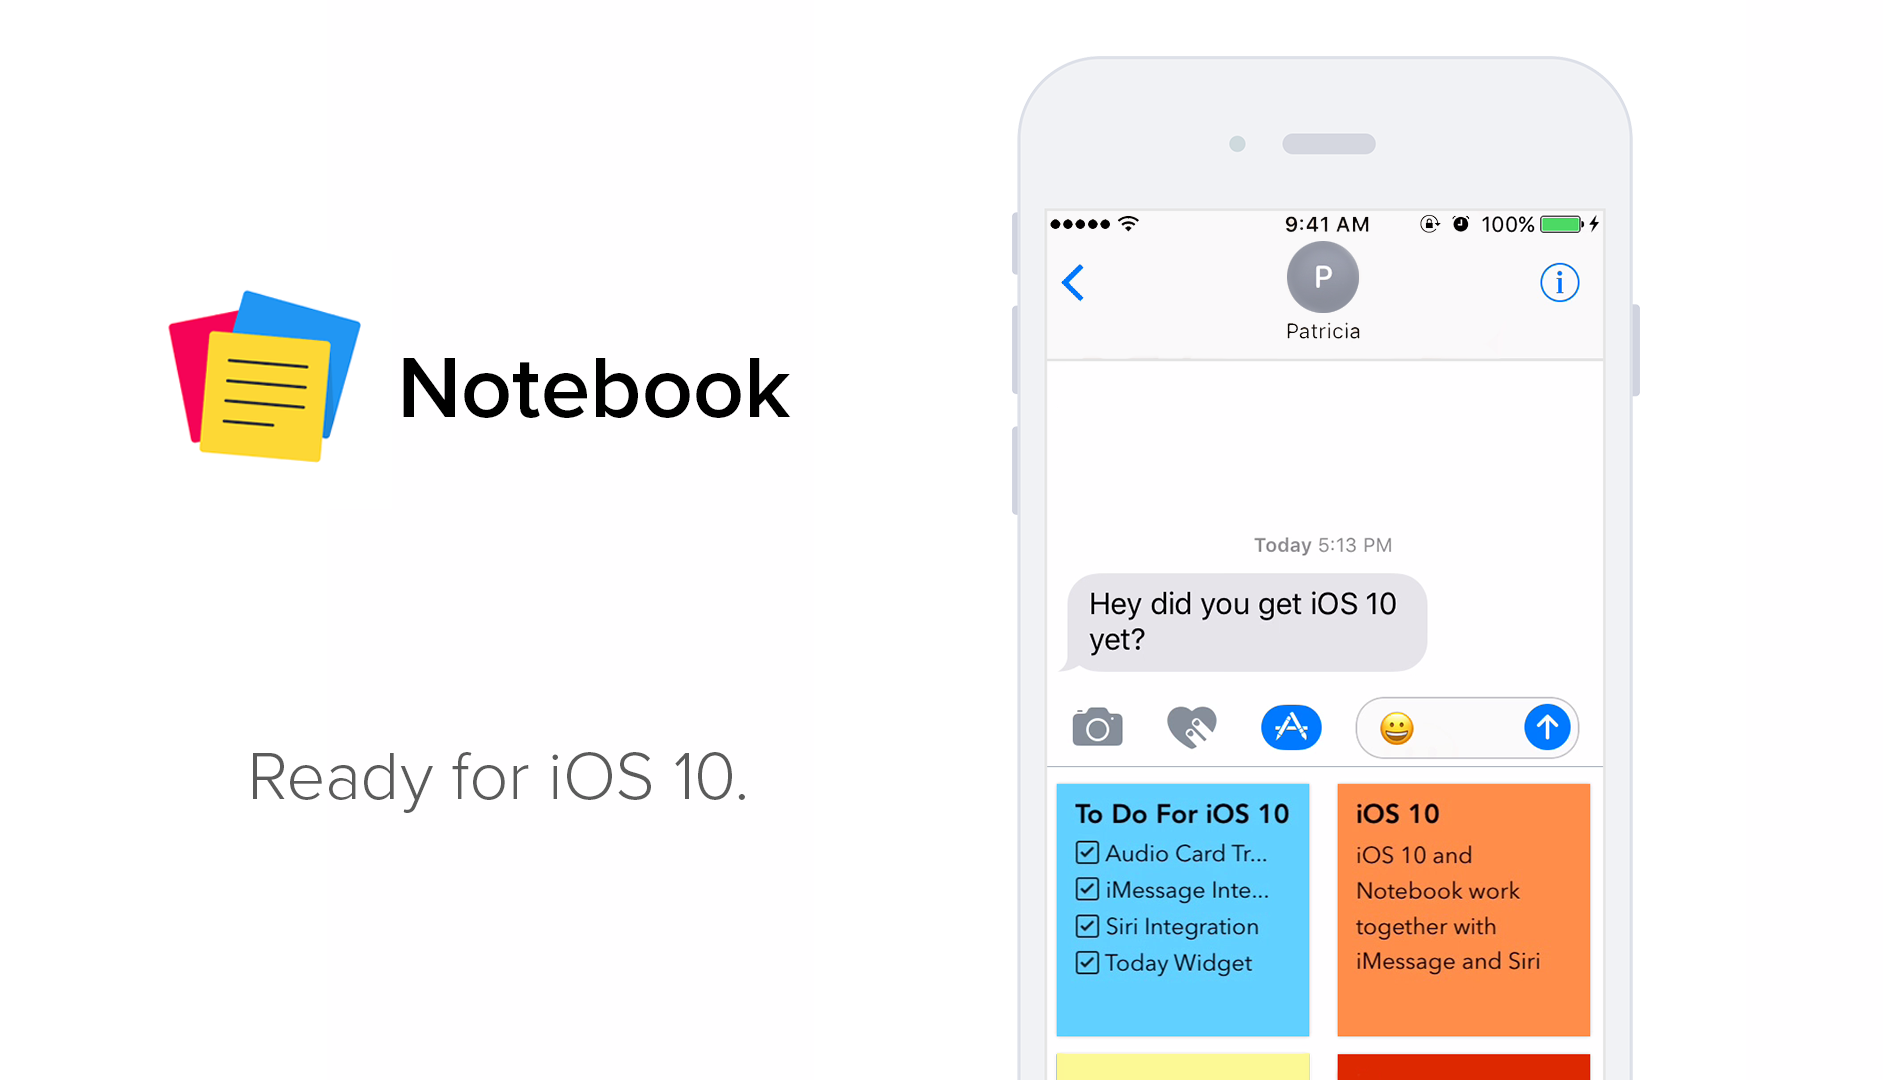 Notebook Ready for iOS 10